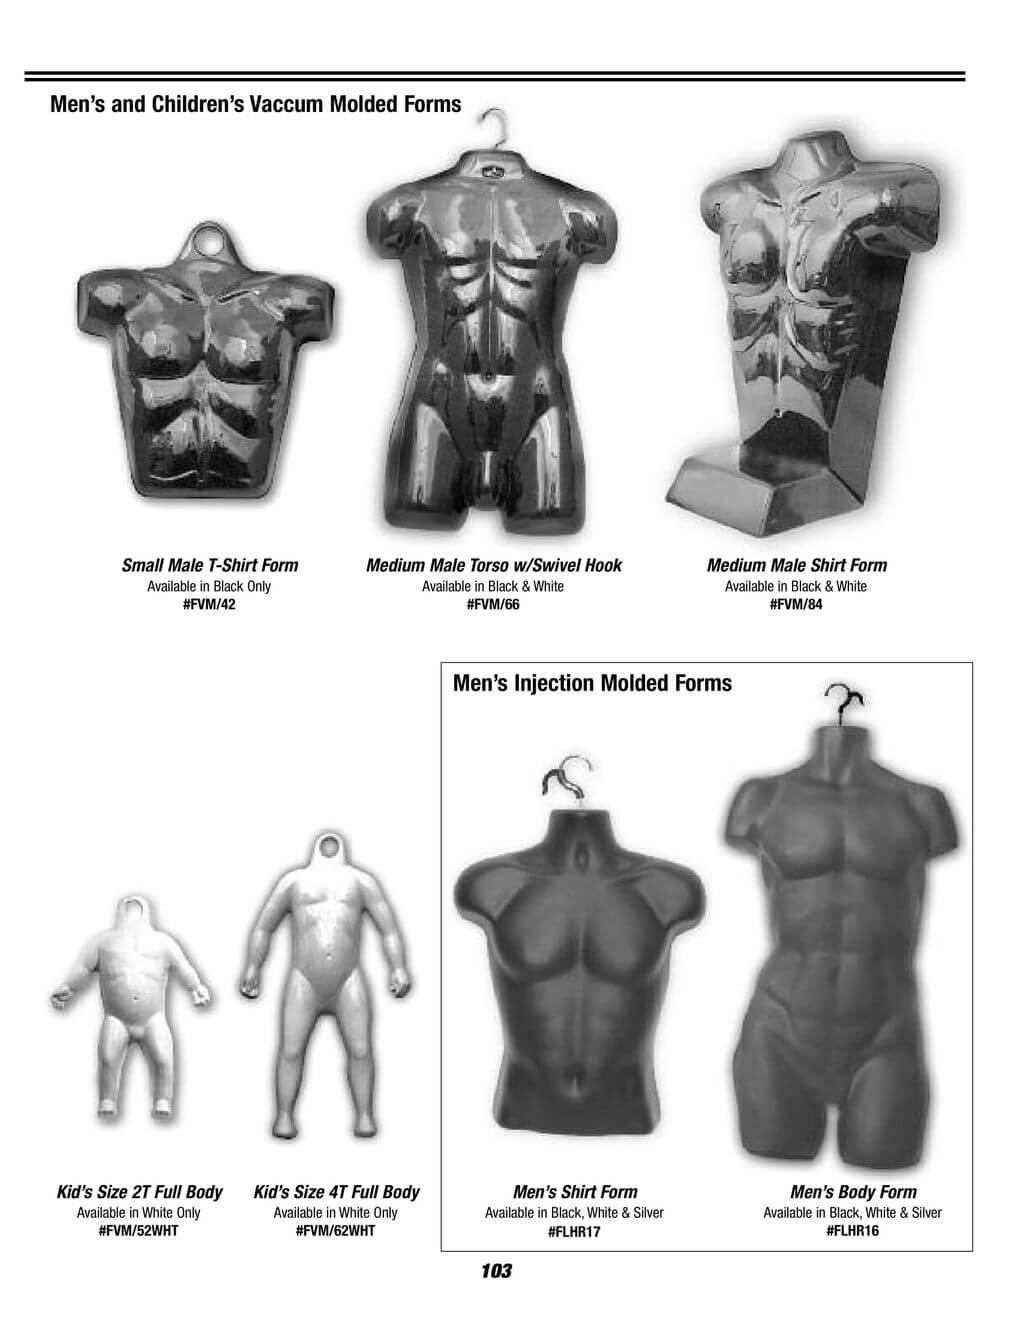 men's and children vaccum molded forms